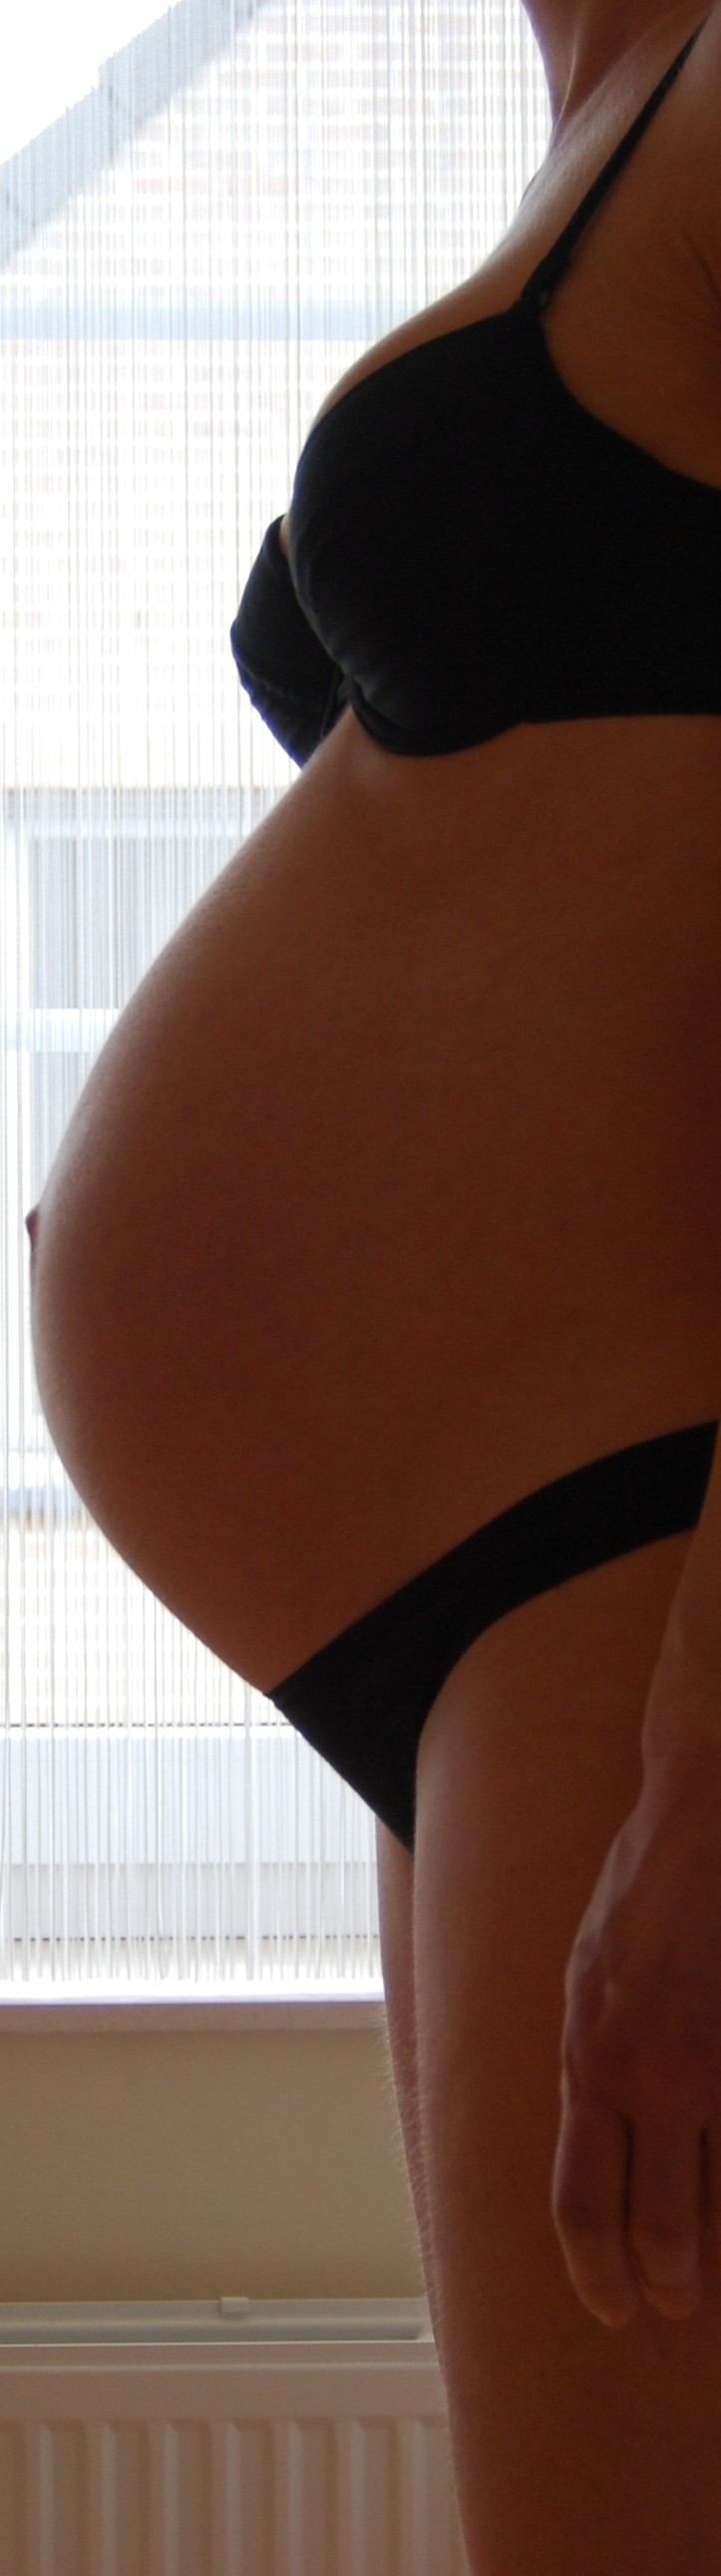 pregnant woman's belly hoping for a peaceful birth